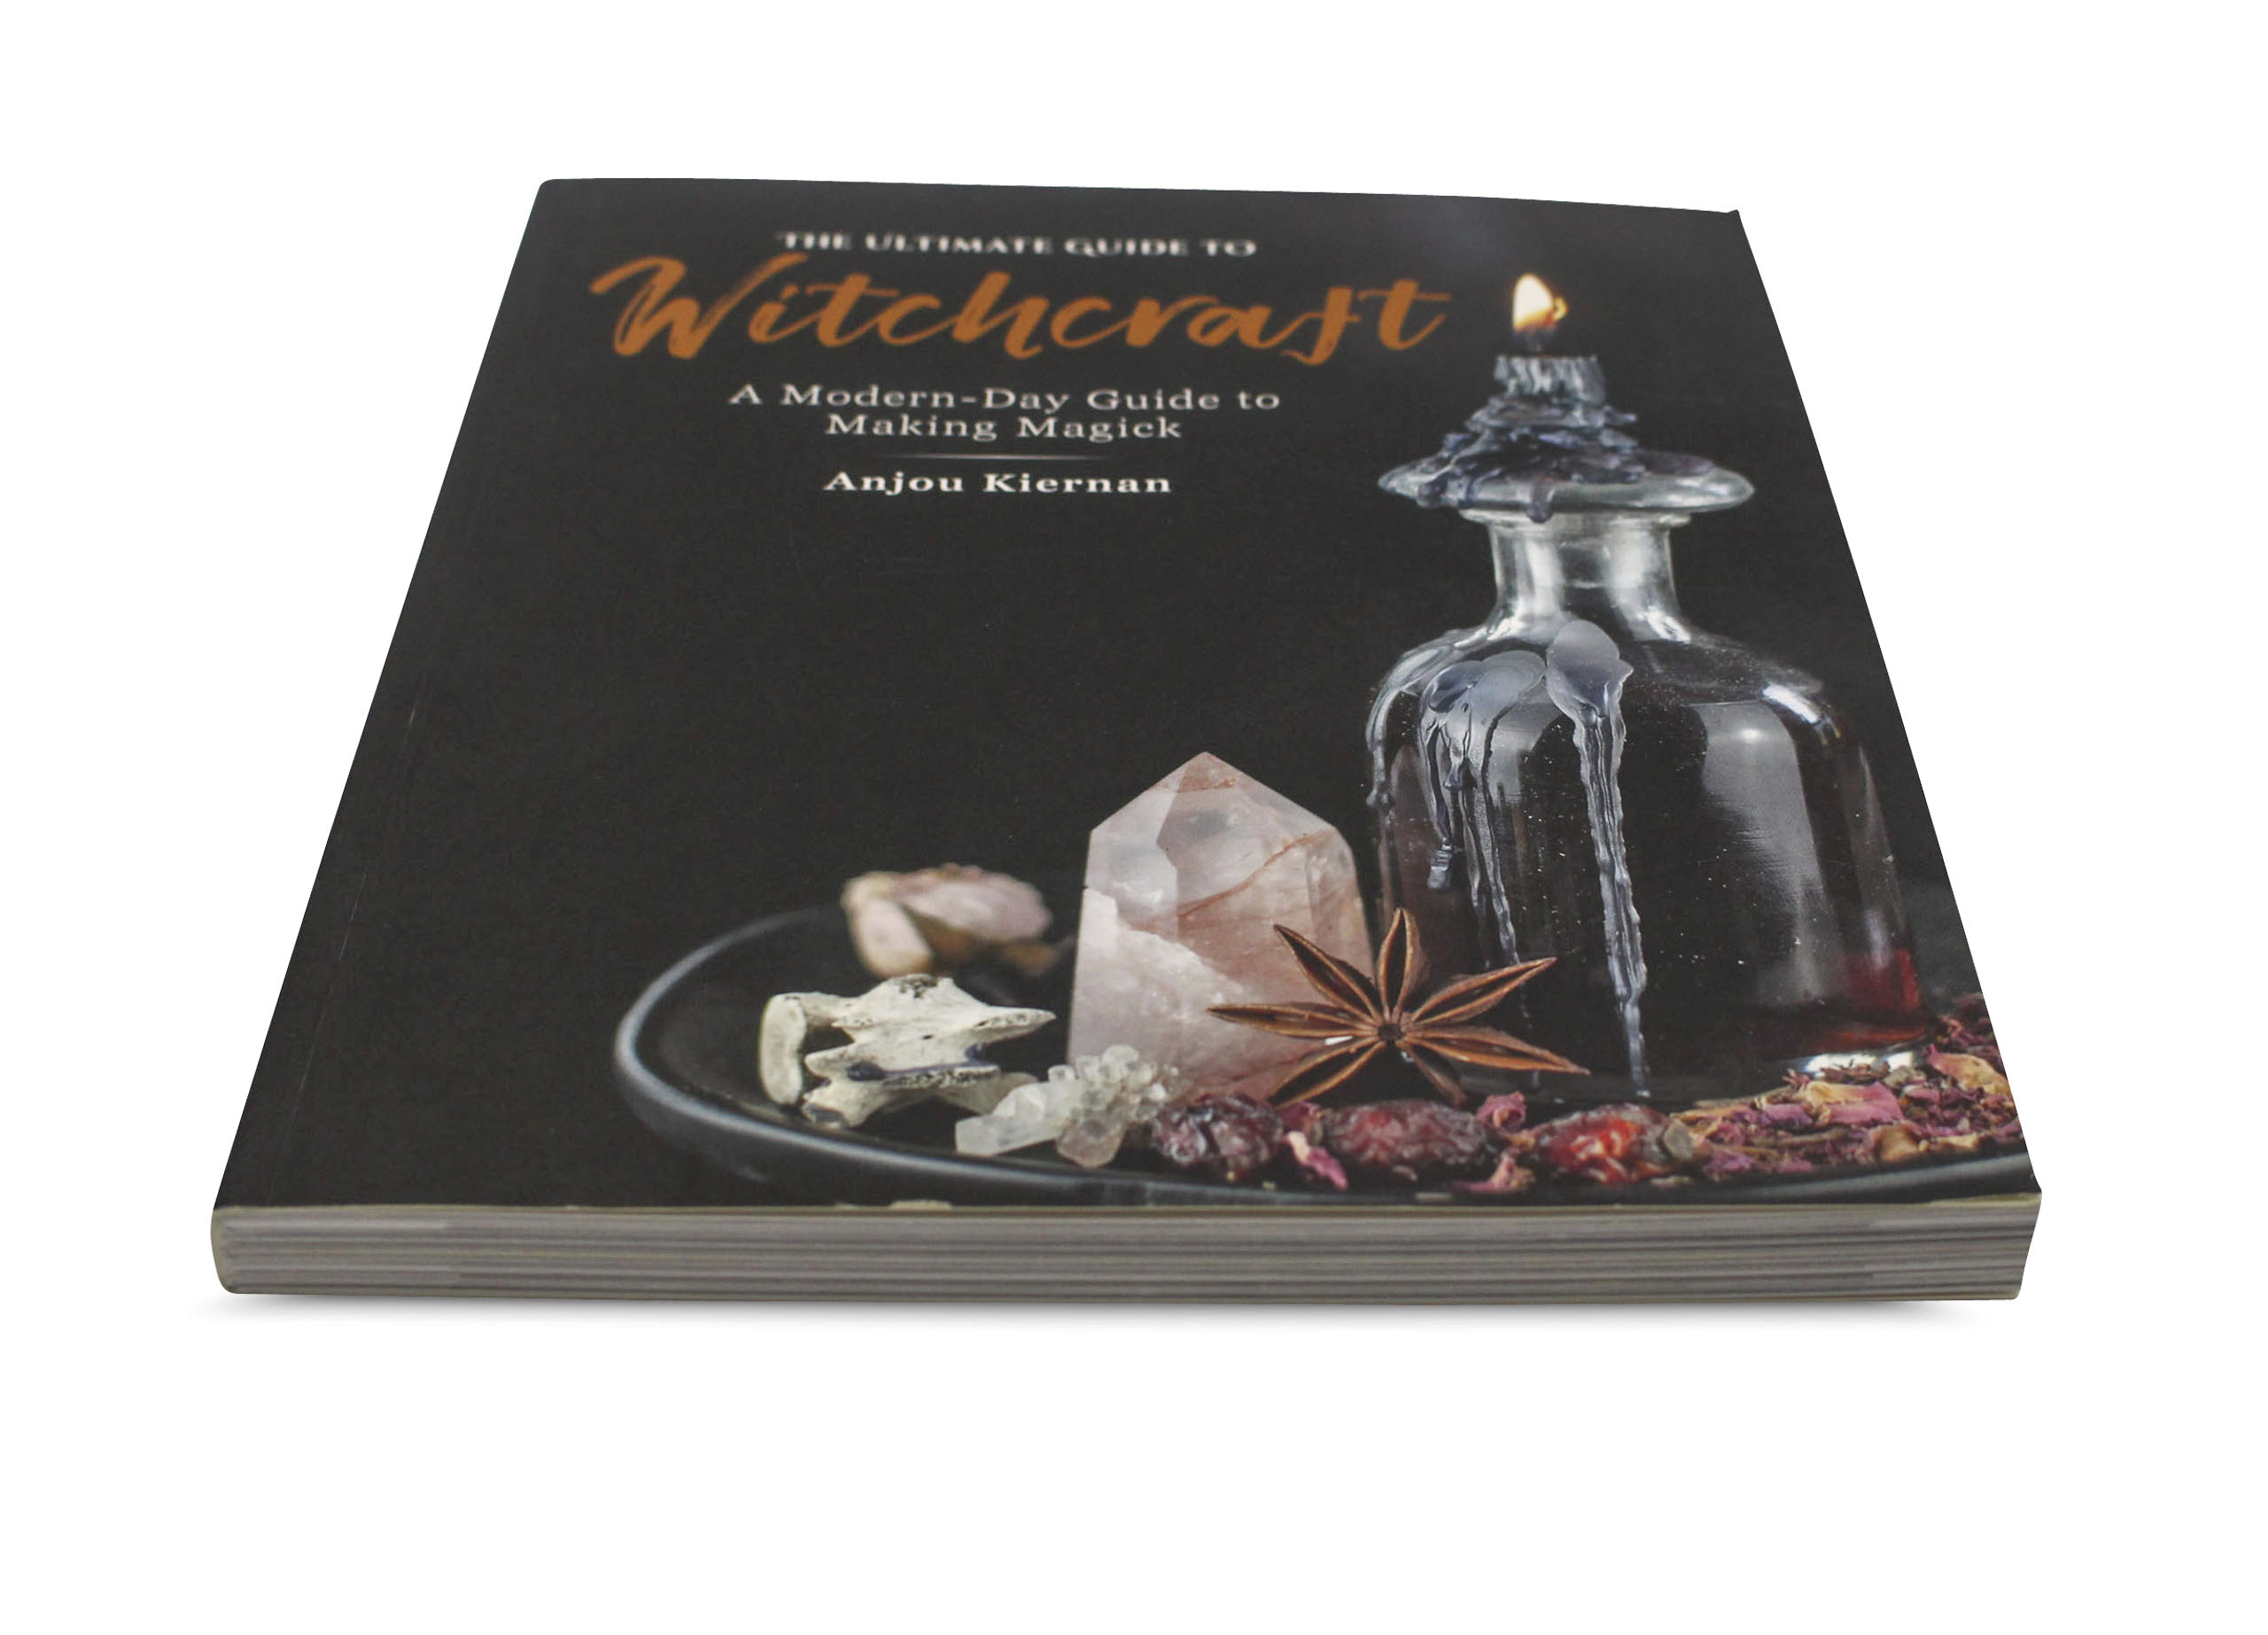 The Ultimate Guide To Witchcraft-Crystal Dreams